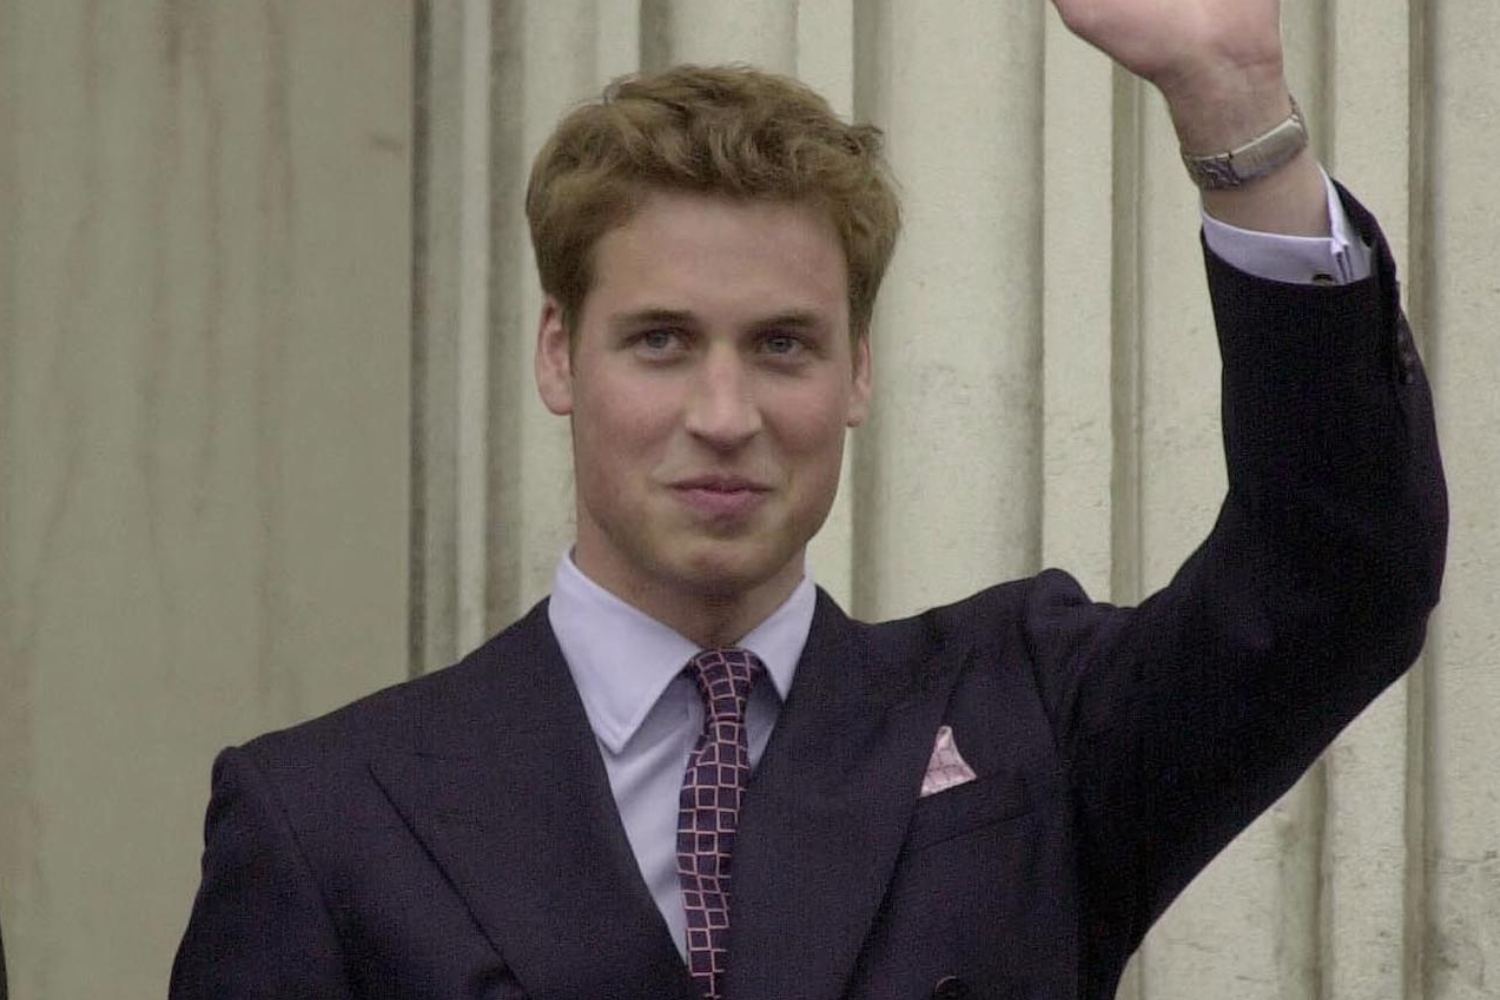 'Blushing' Prince William Gets Rockstar Welcome in Viral Video